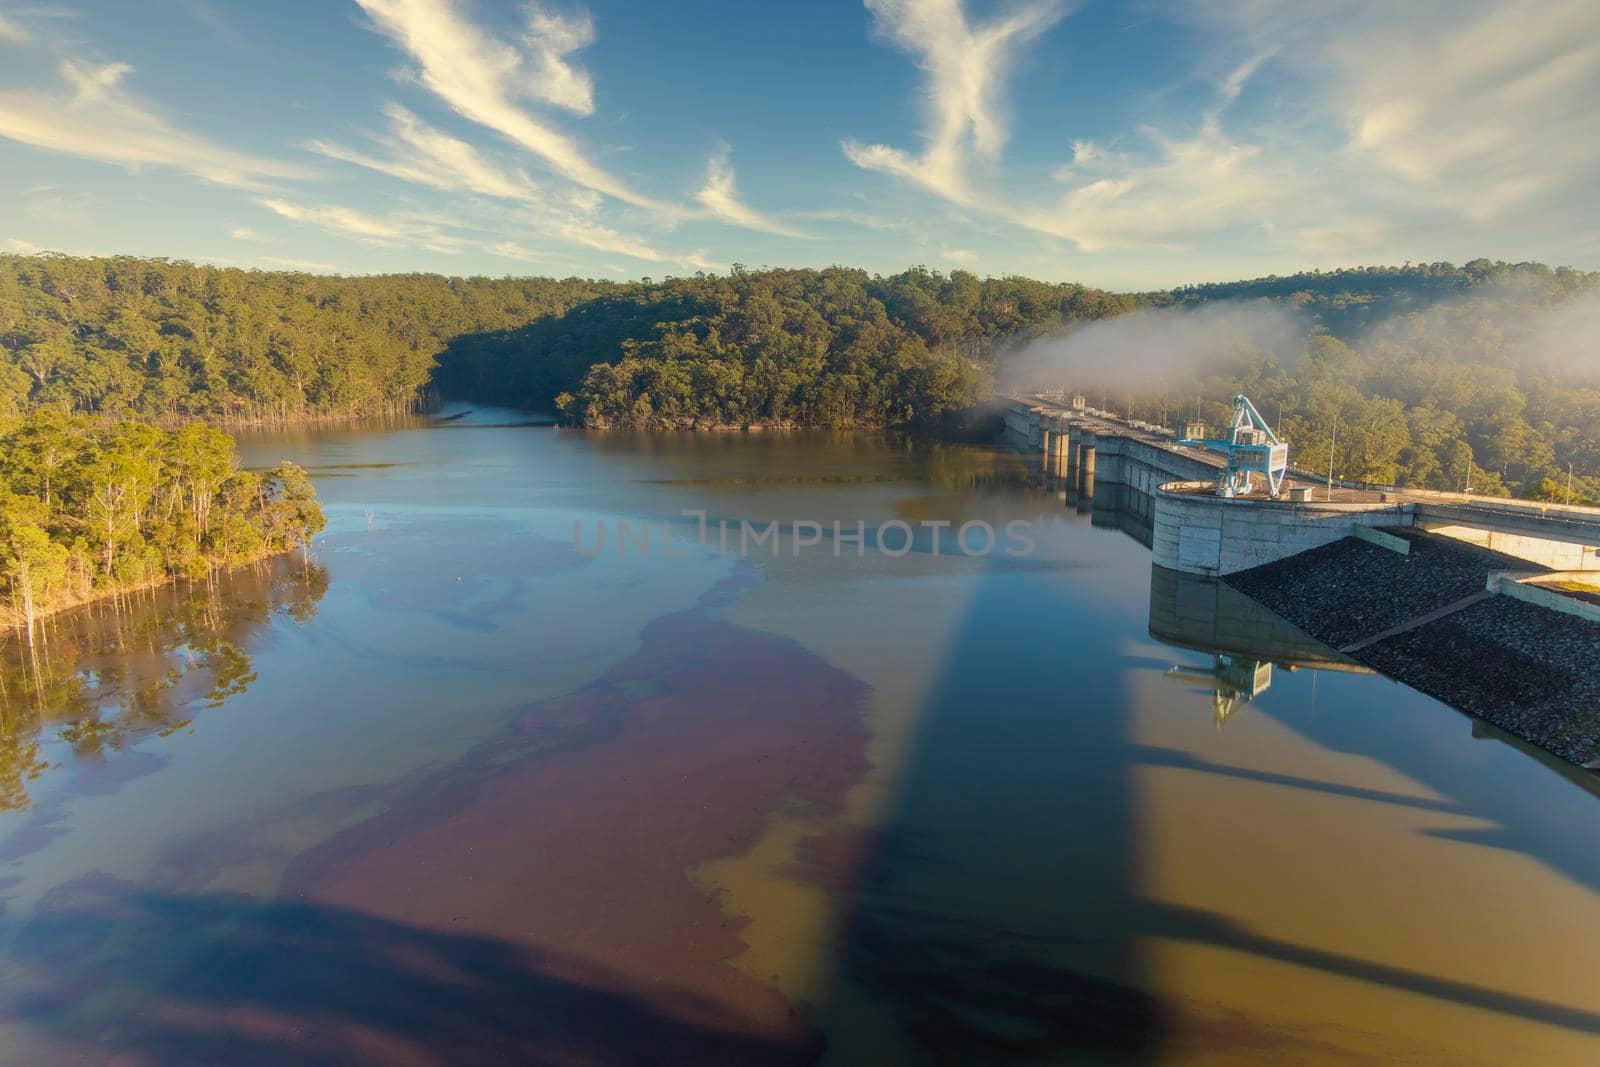 The Dam wall of a large fresh water reservoir in regional Australia by WittkePhotos